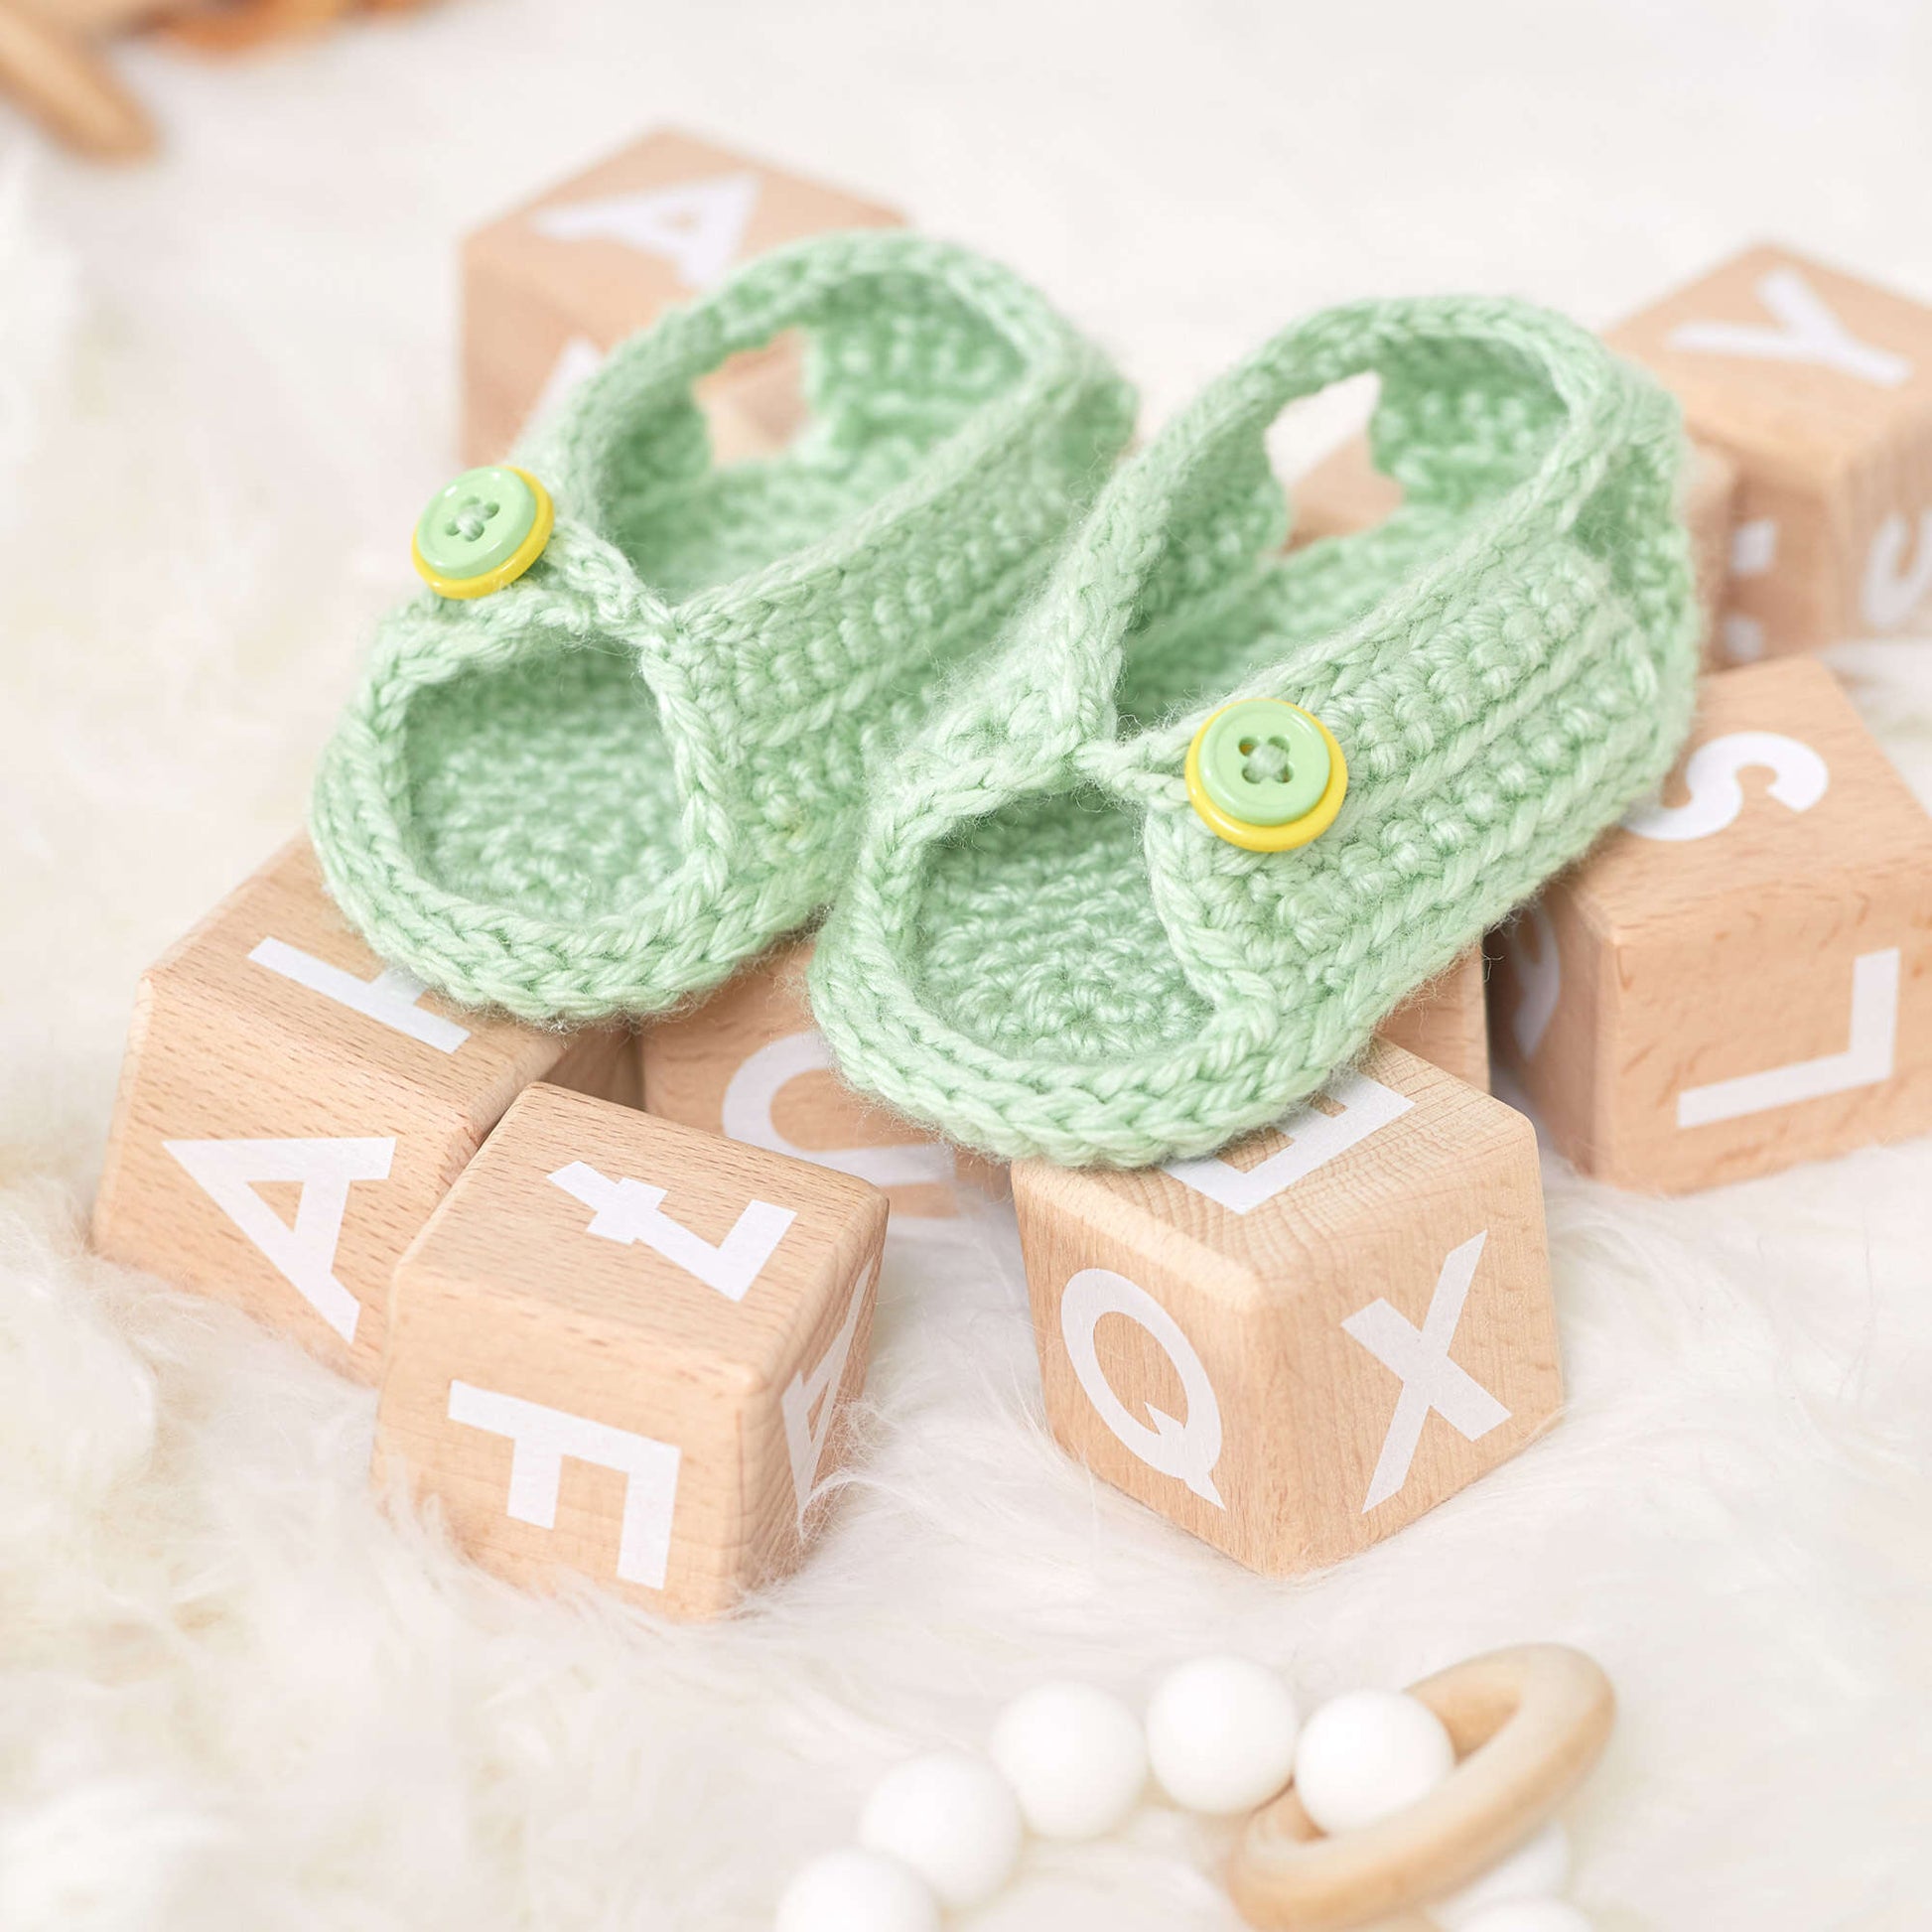 Free Red Heart Crochet Unisex Sandals For Baby Pattern